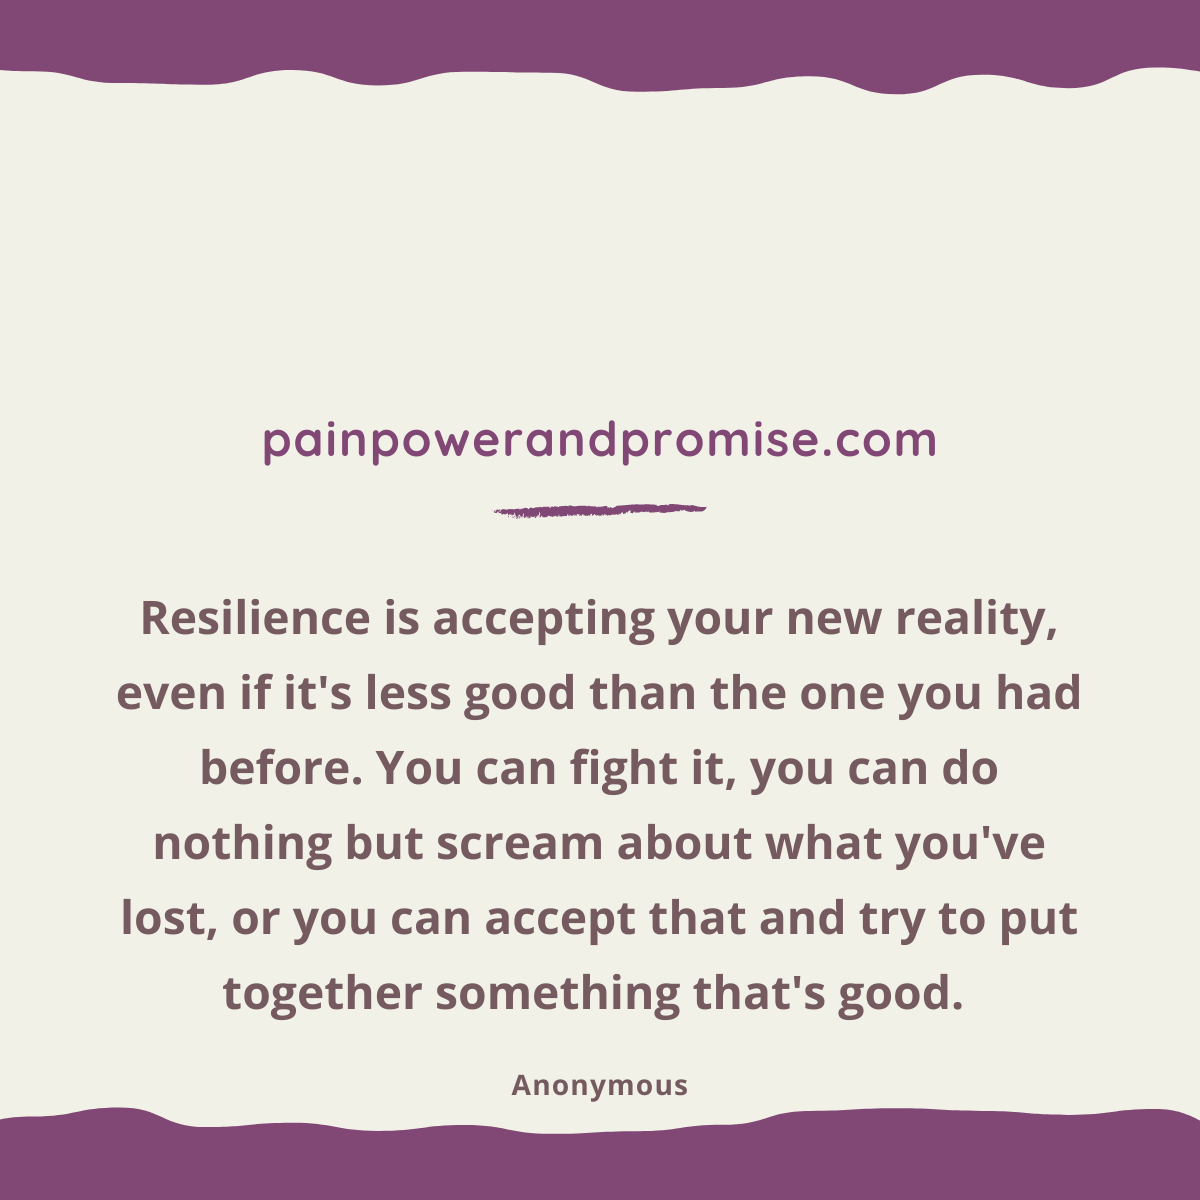 Inspirational Quote: Resilience is accepting your new reality., even if it's less good than the one you had before. You can fight it, you can do nothing but scream about what you've lost, or you can accept that and try to put together something that's good.